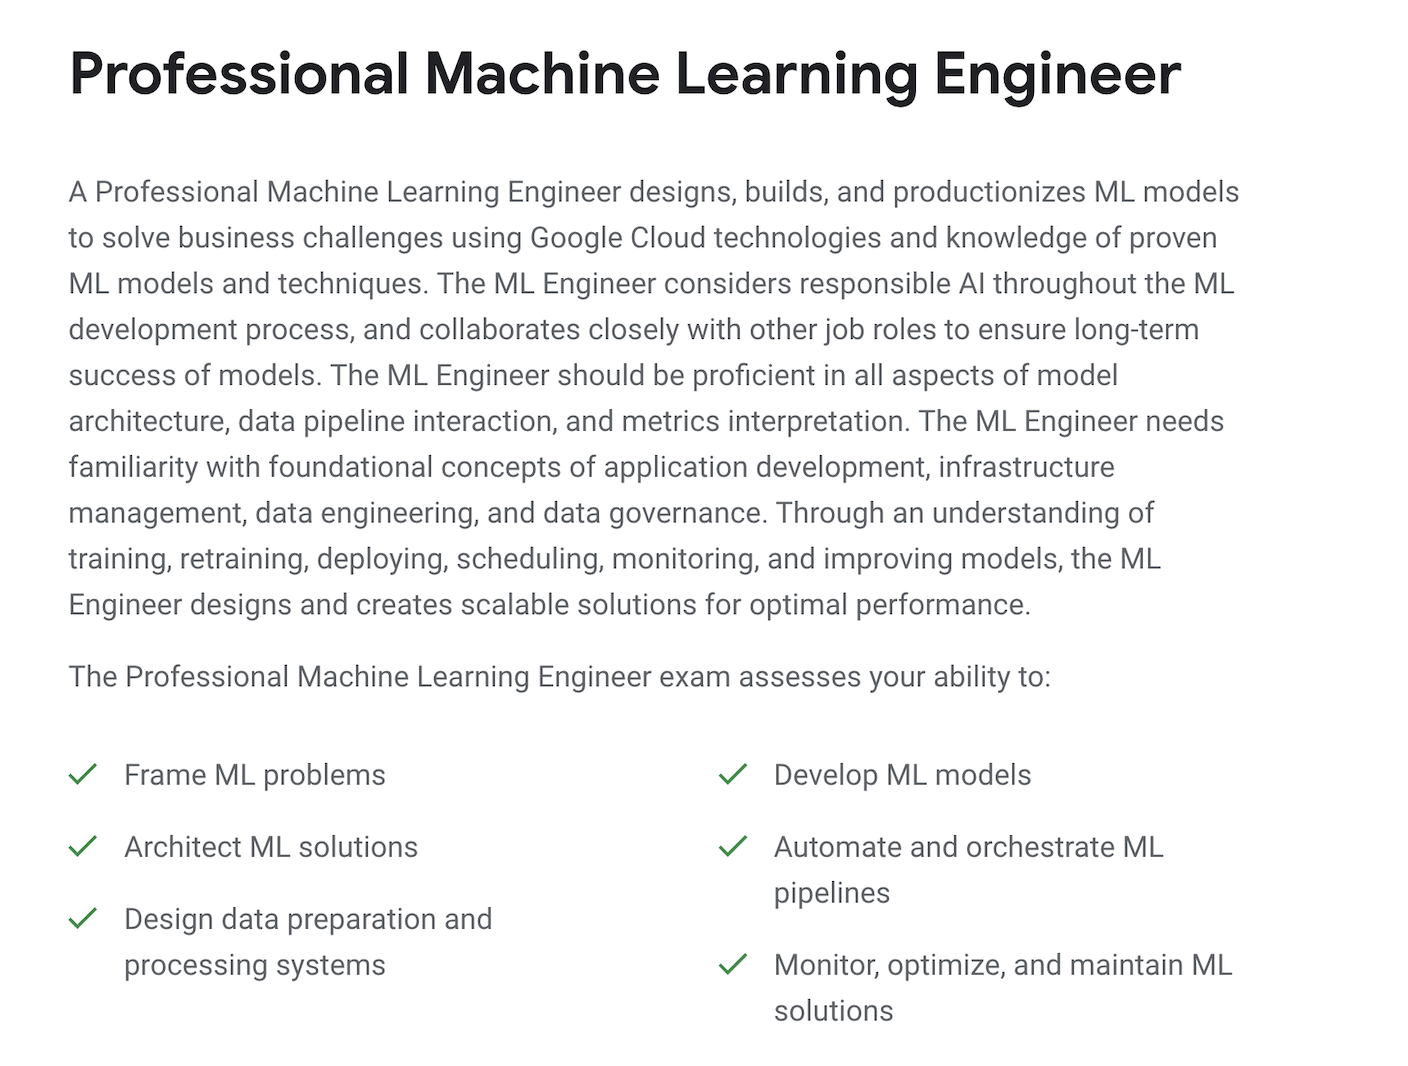 machine learning certification: Professional Machine Learning Engineer by Google